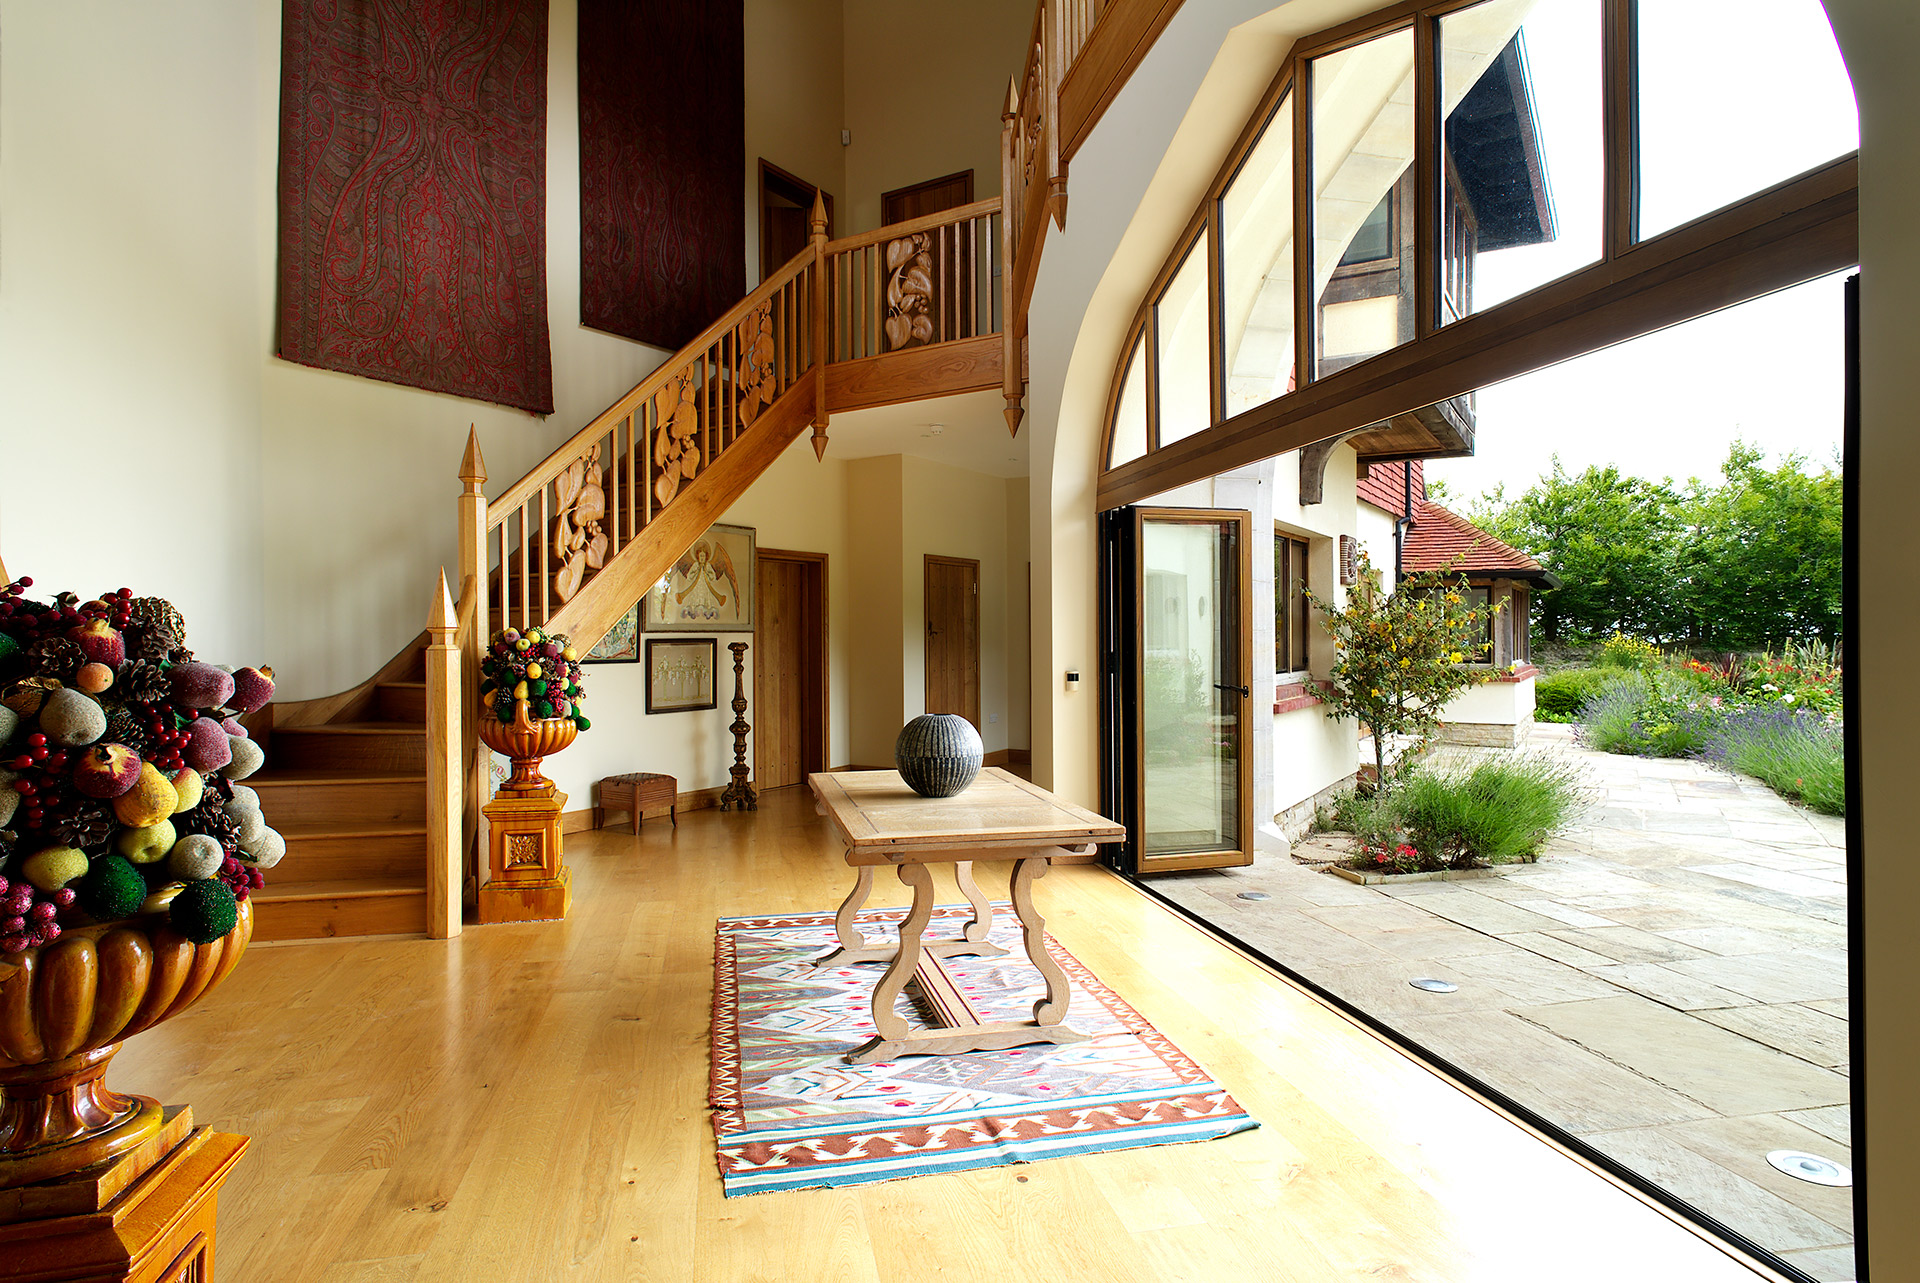 grand entrance hall with large patio doors leading out onto beautiful garden